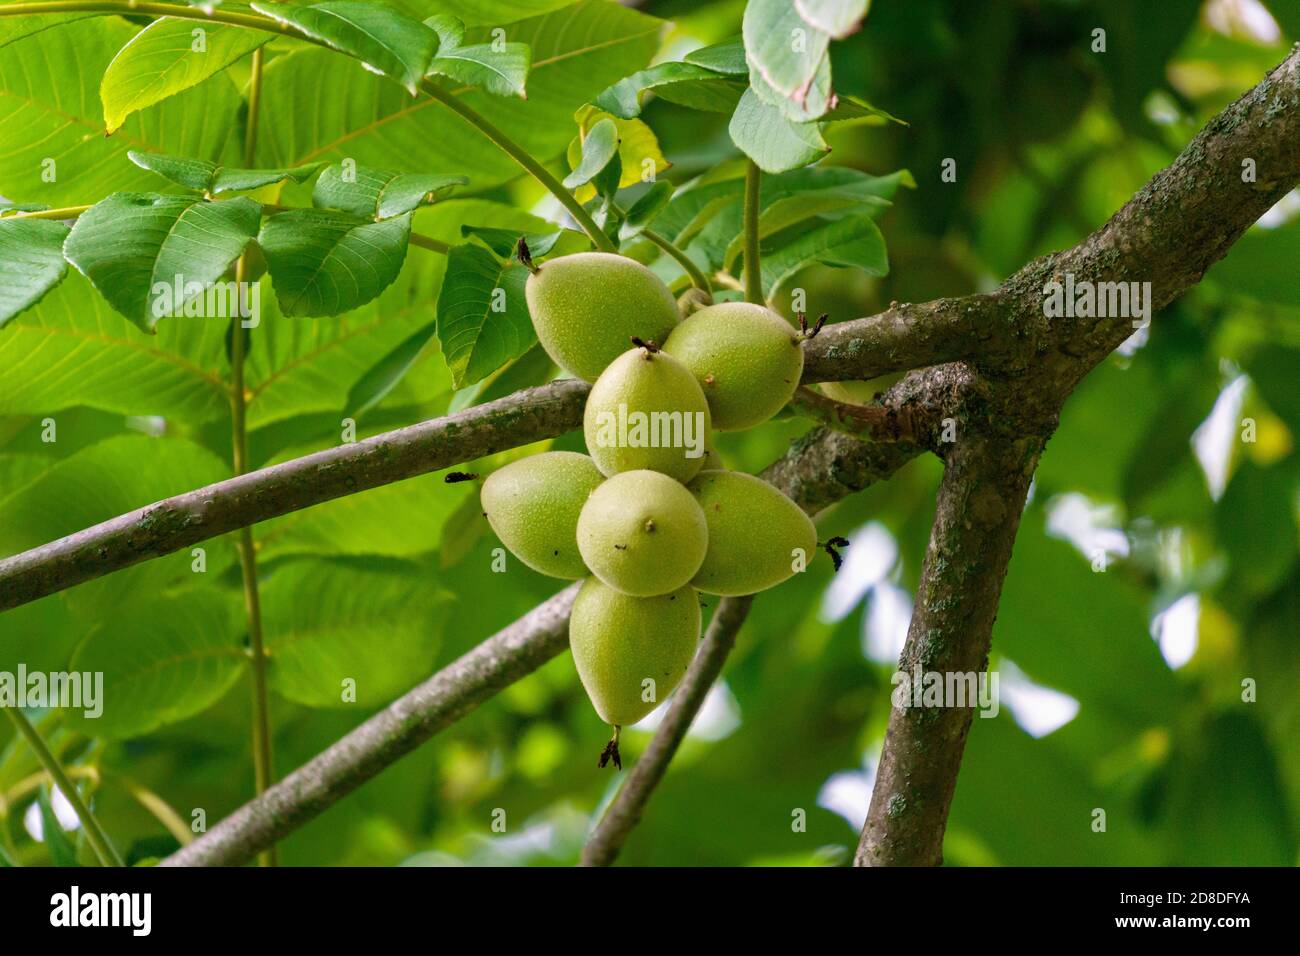 Green young fruits of a walnut in a green shell on a tree. Stock Photo